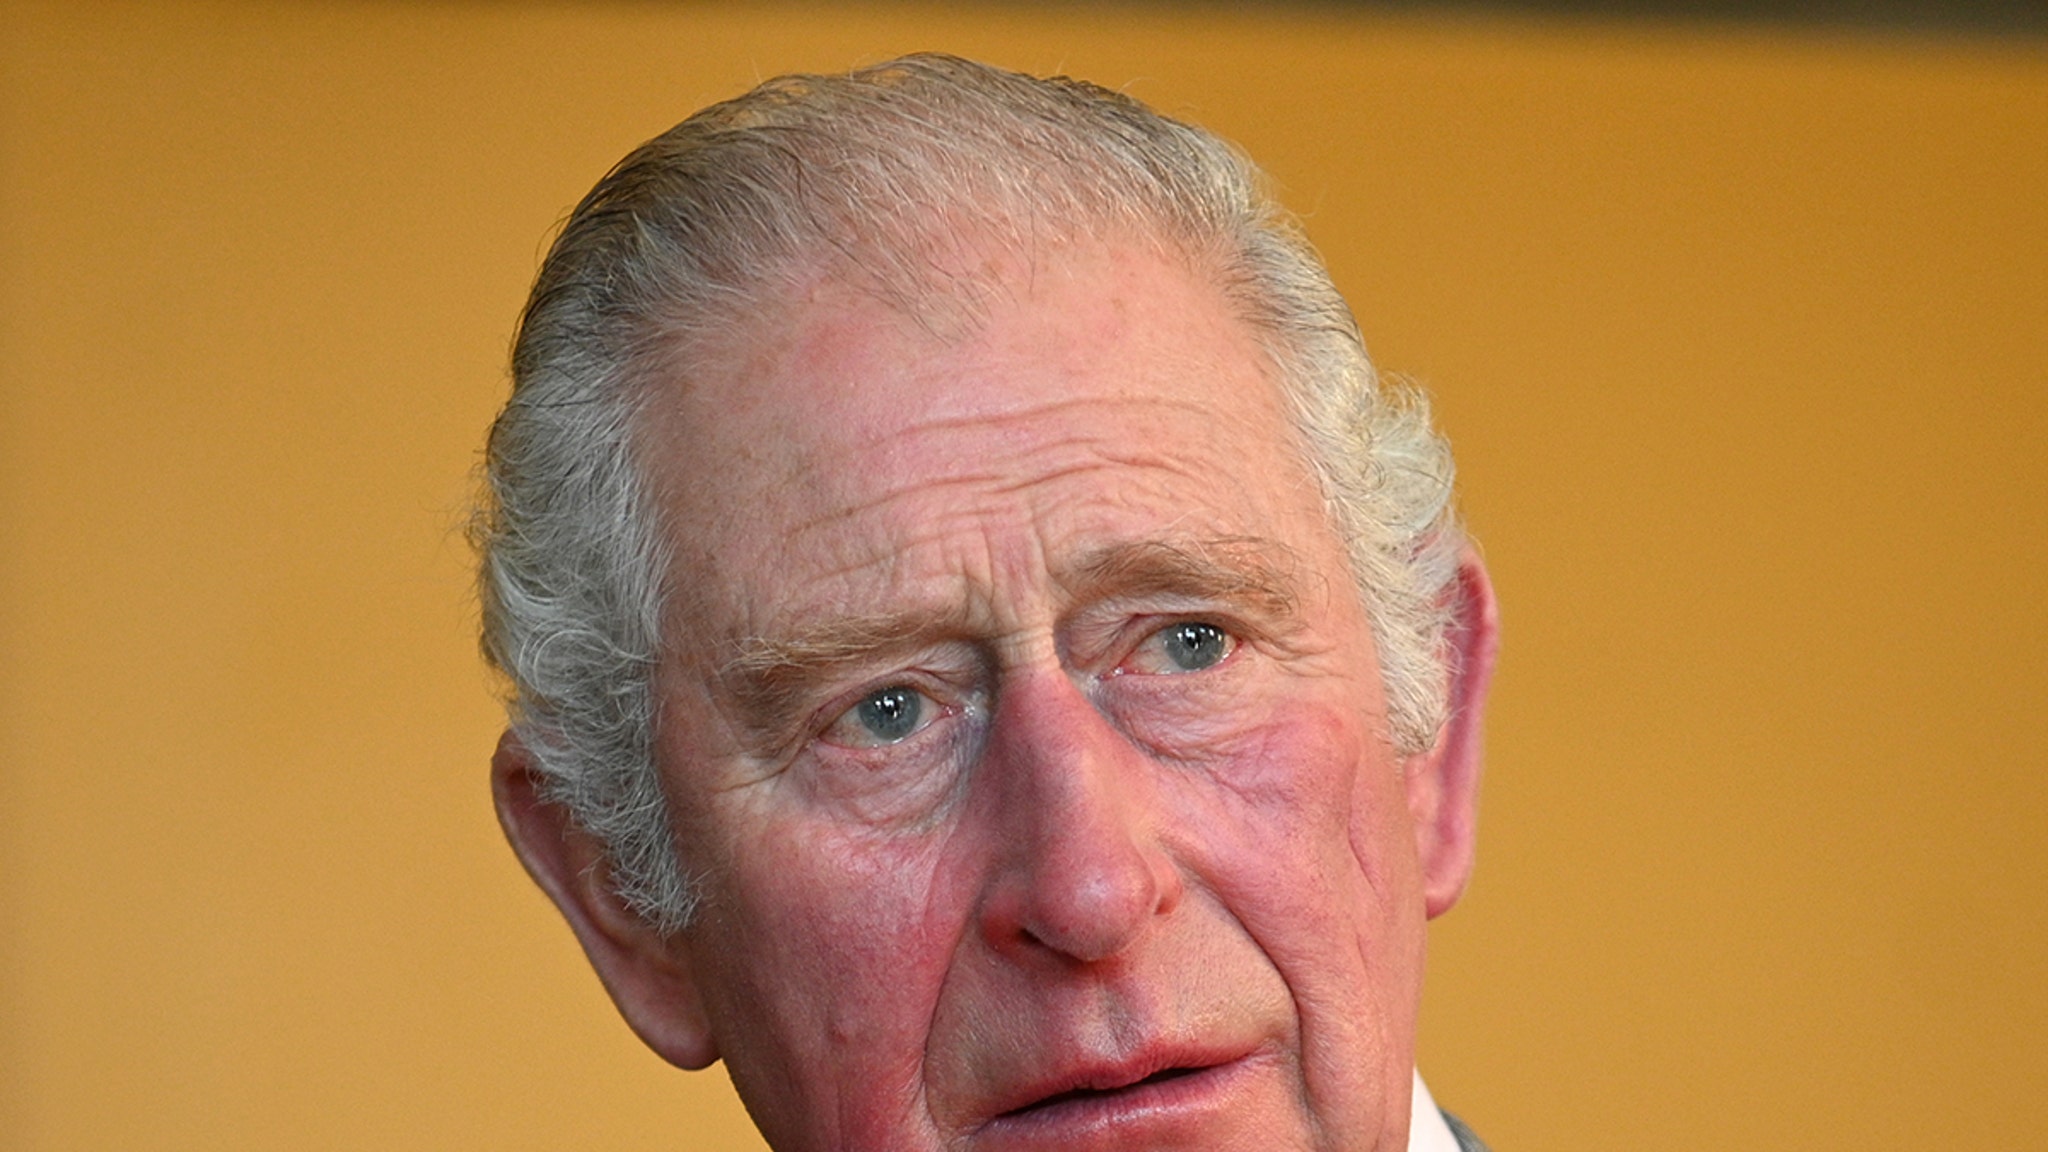 Prince Charles Asked About Skin Color of Harry and Meghan's Baby, New Book Claims